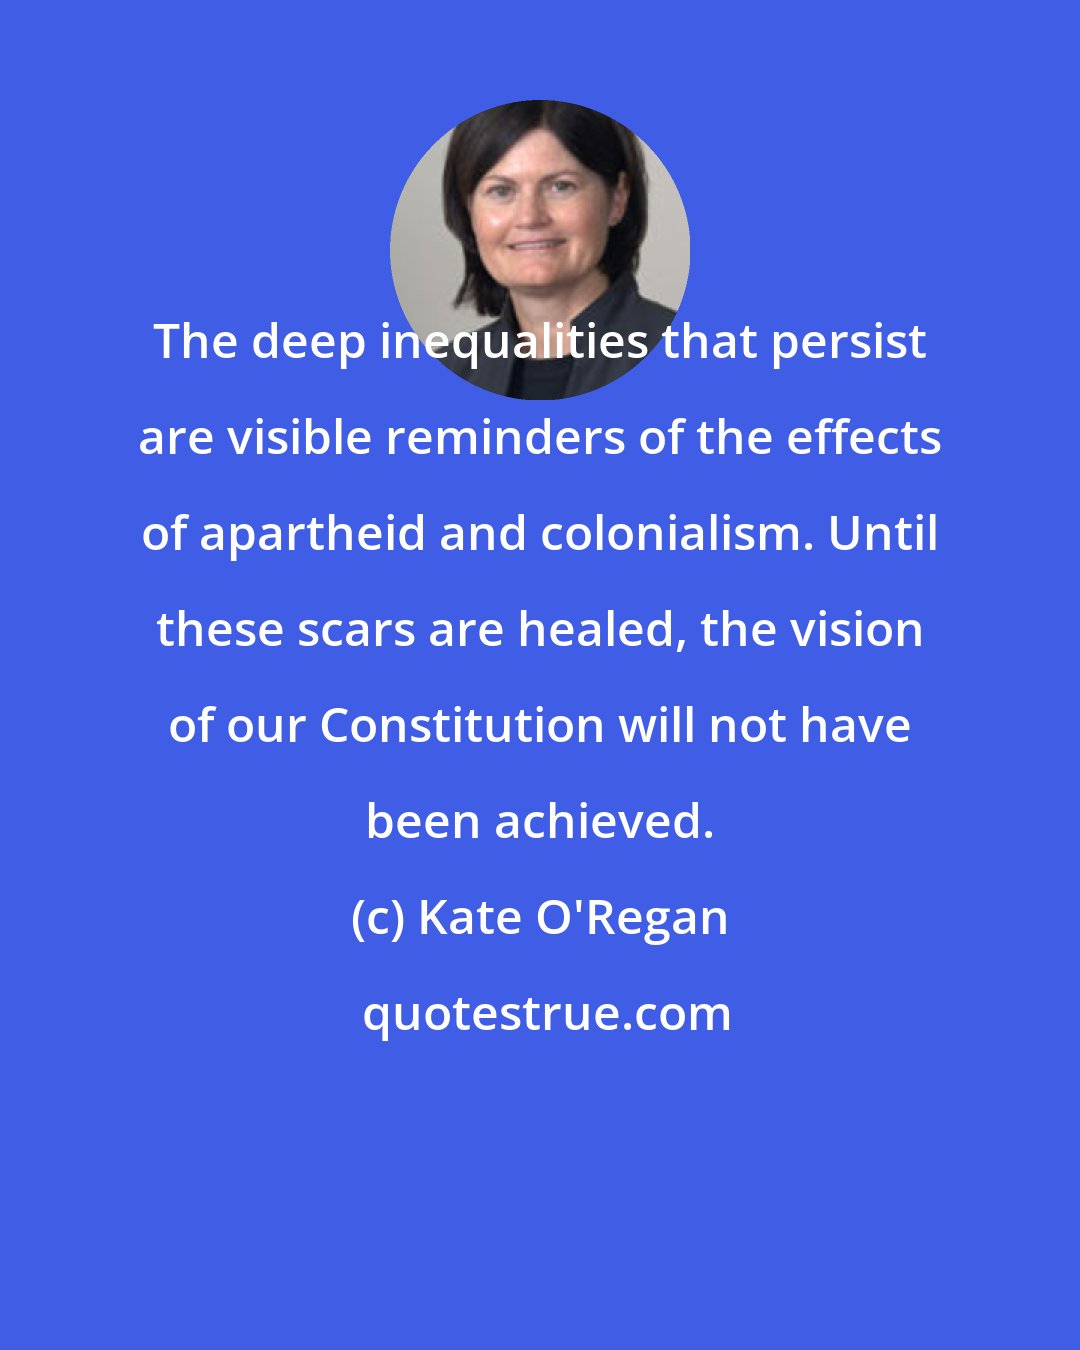 Kate O'Regan: The deep inequalities that persist are visible reminders of the effects of apartheid and colonialism. Until these scars are healed, the vision of our Constitution will not have been achieved.